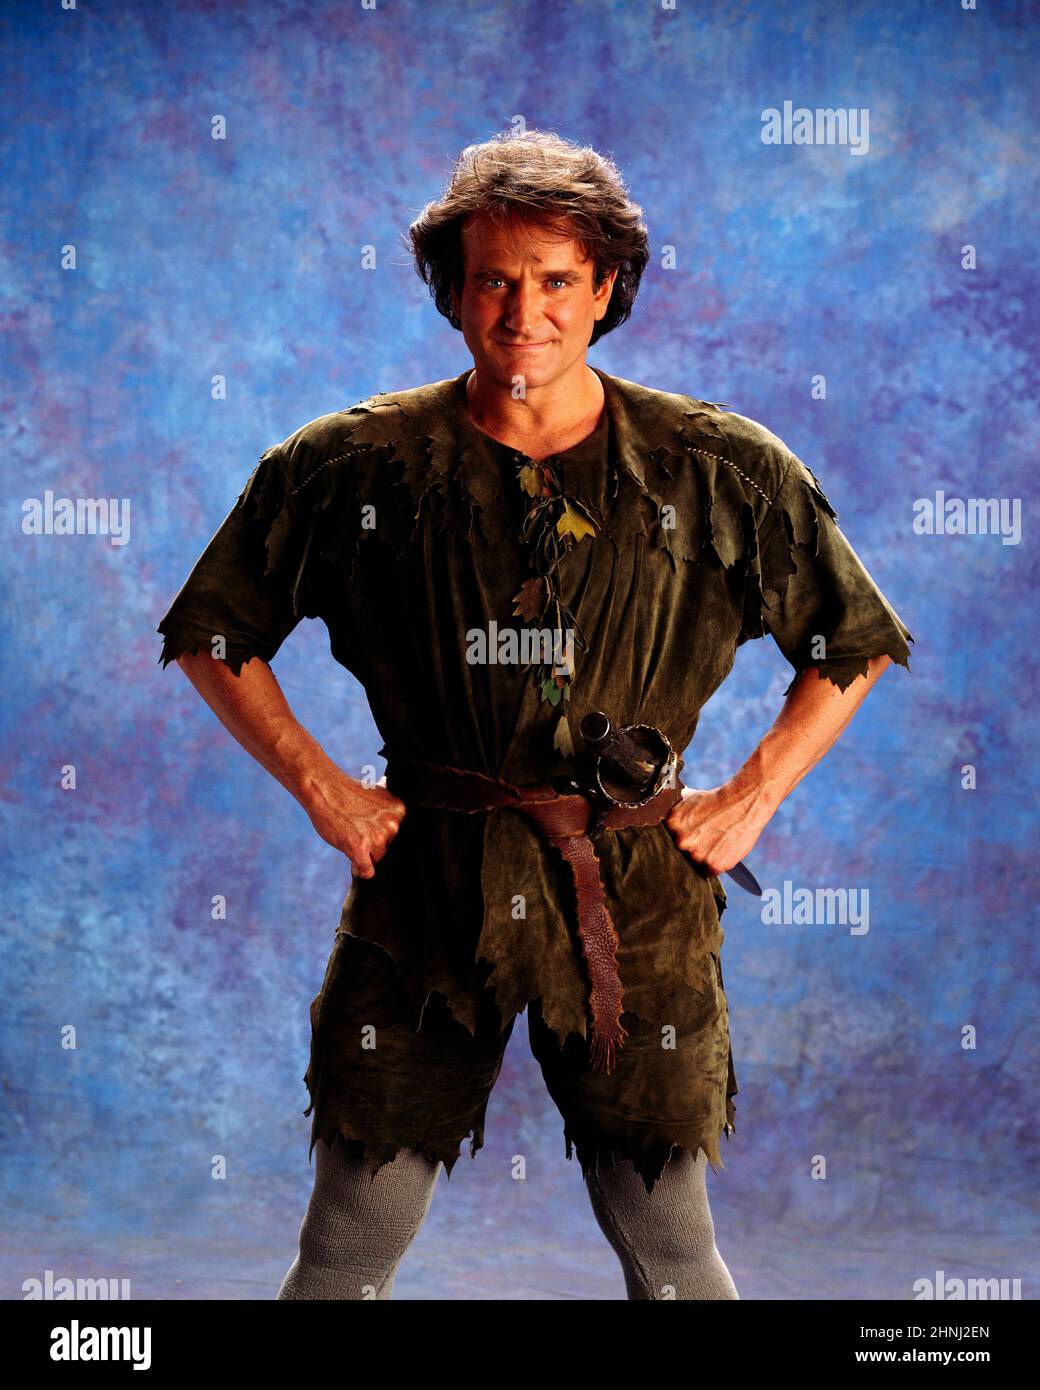 ROBIN WILLIAMS in HOOK (1991), directed by STEVEN SPIELBERG. Credit:  COLUMBIA TRISTAR / Album Stock Photo - Alamy